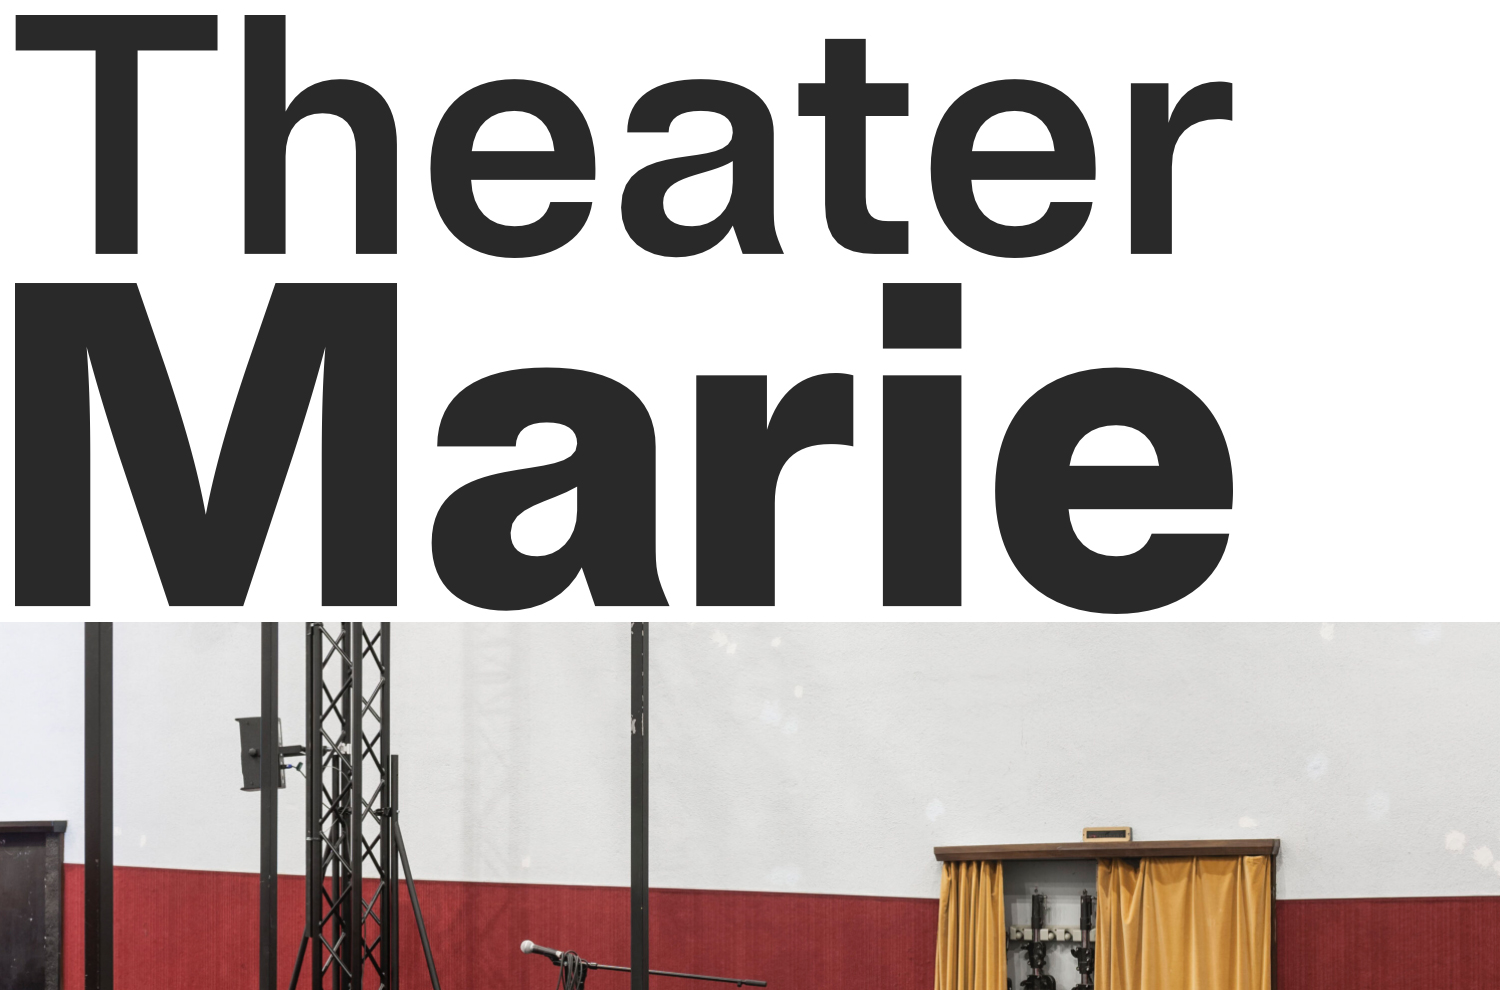 Theater Marie